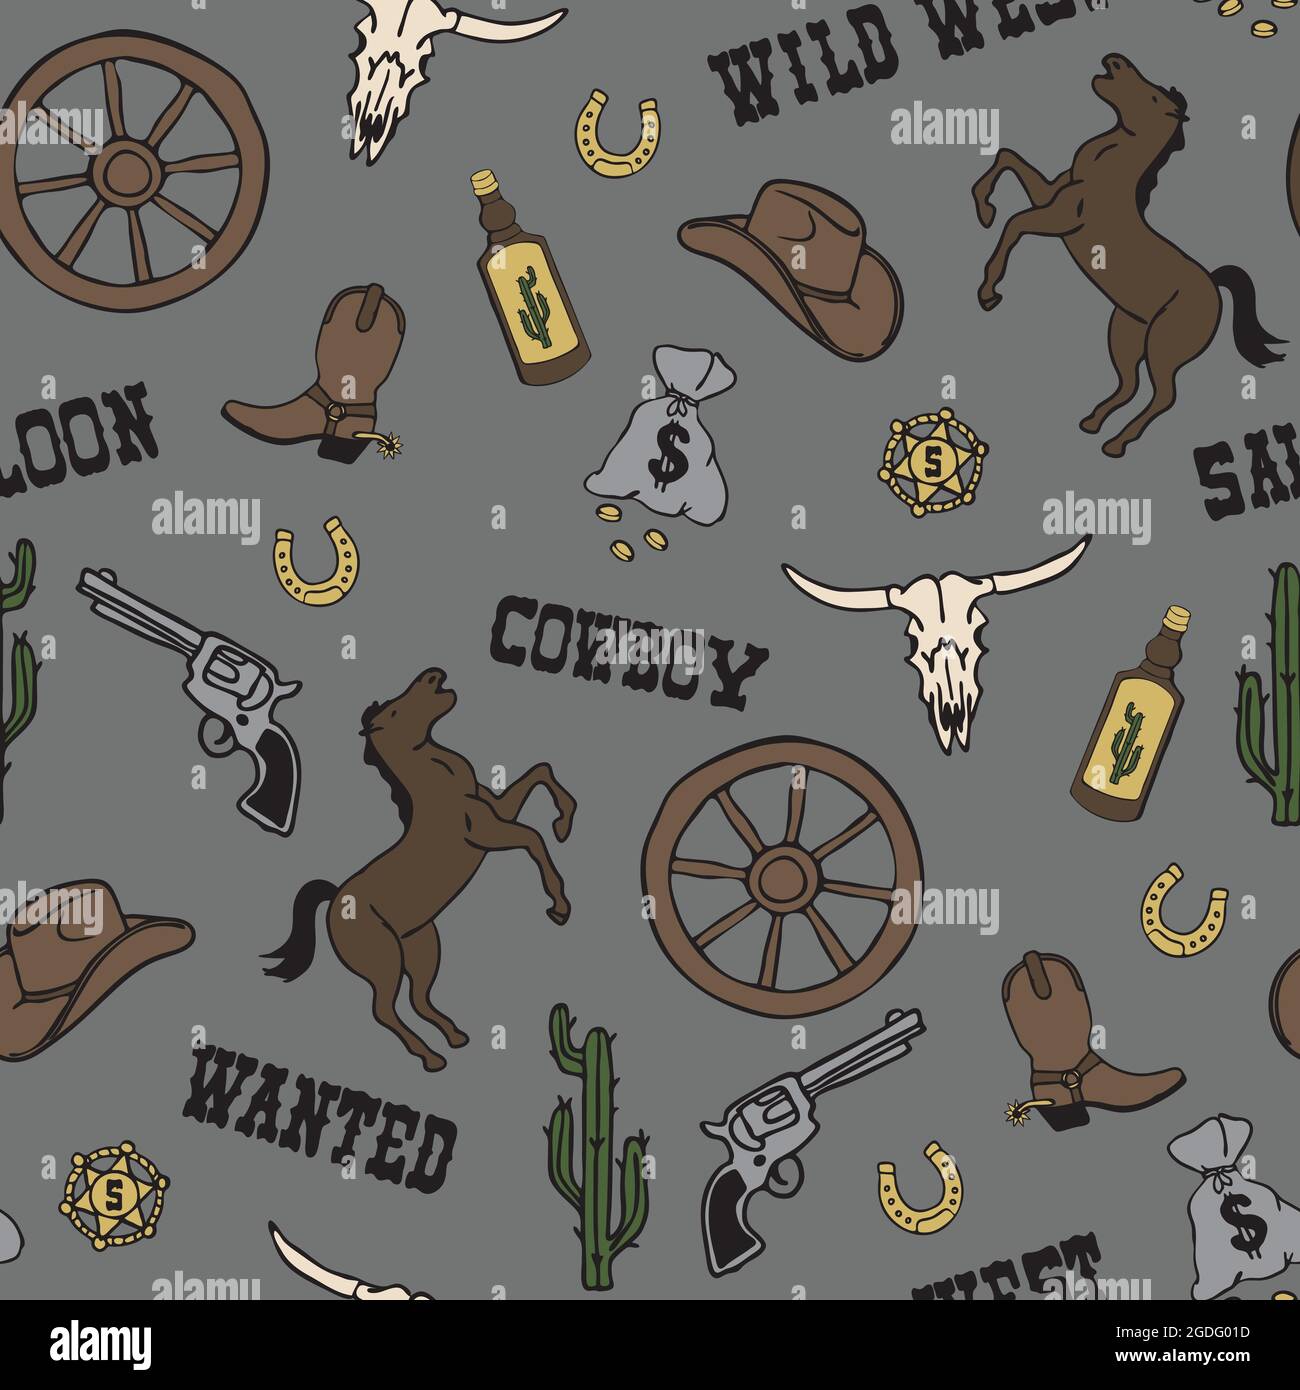 Seamless vector pattern with wild west cowboy on grey background. Simple western wallpaper design for children. Decorative Texas fashion textile. Stock Vector